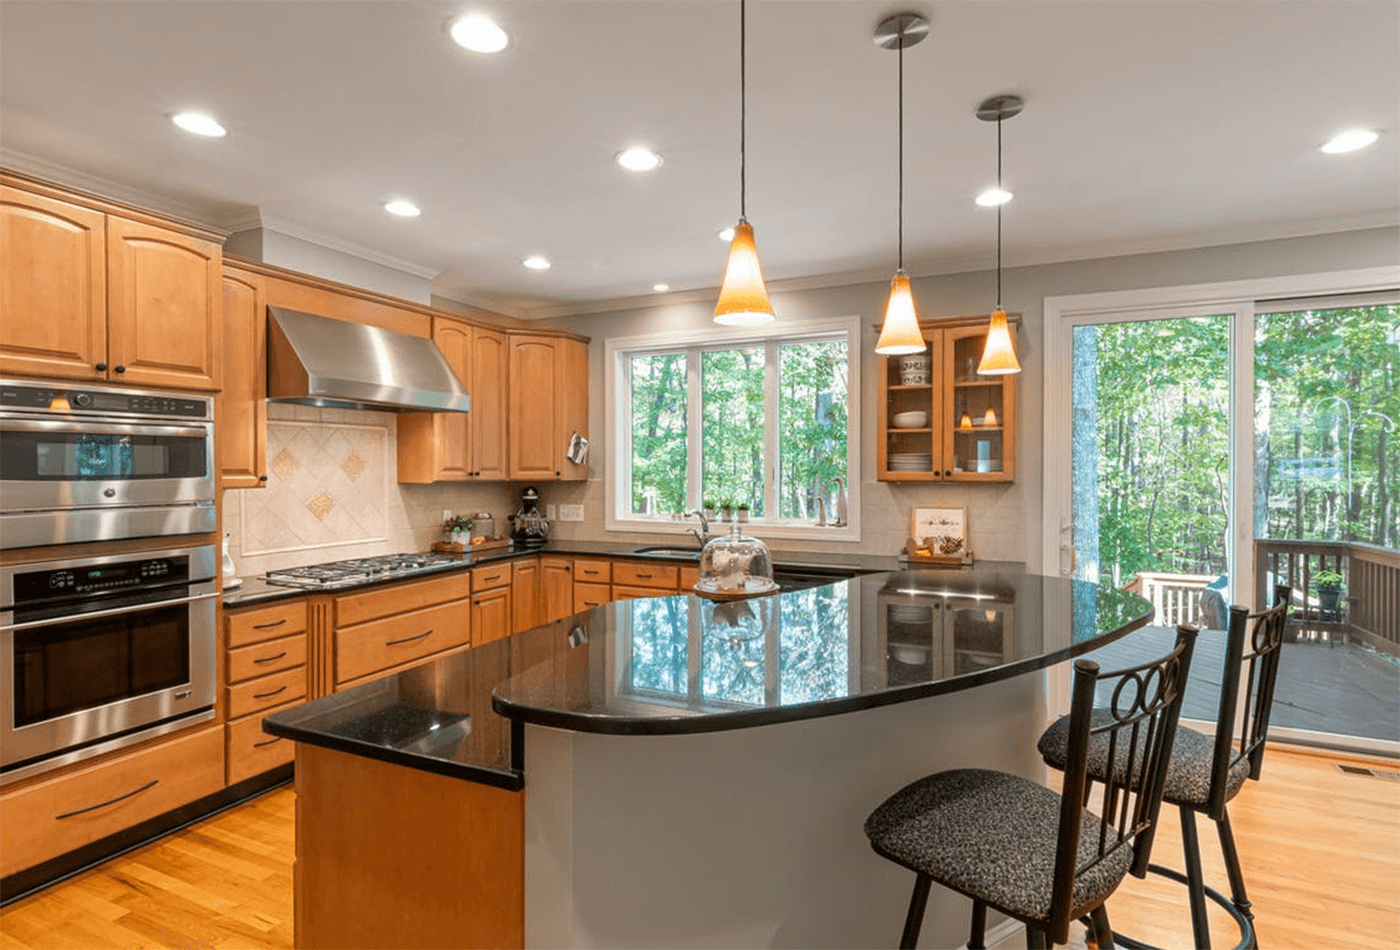 Can Impala Granite Go Well with Wooden Kitchen Cabinets